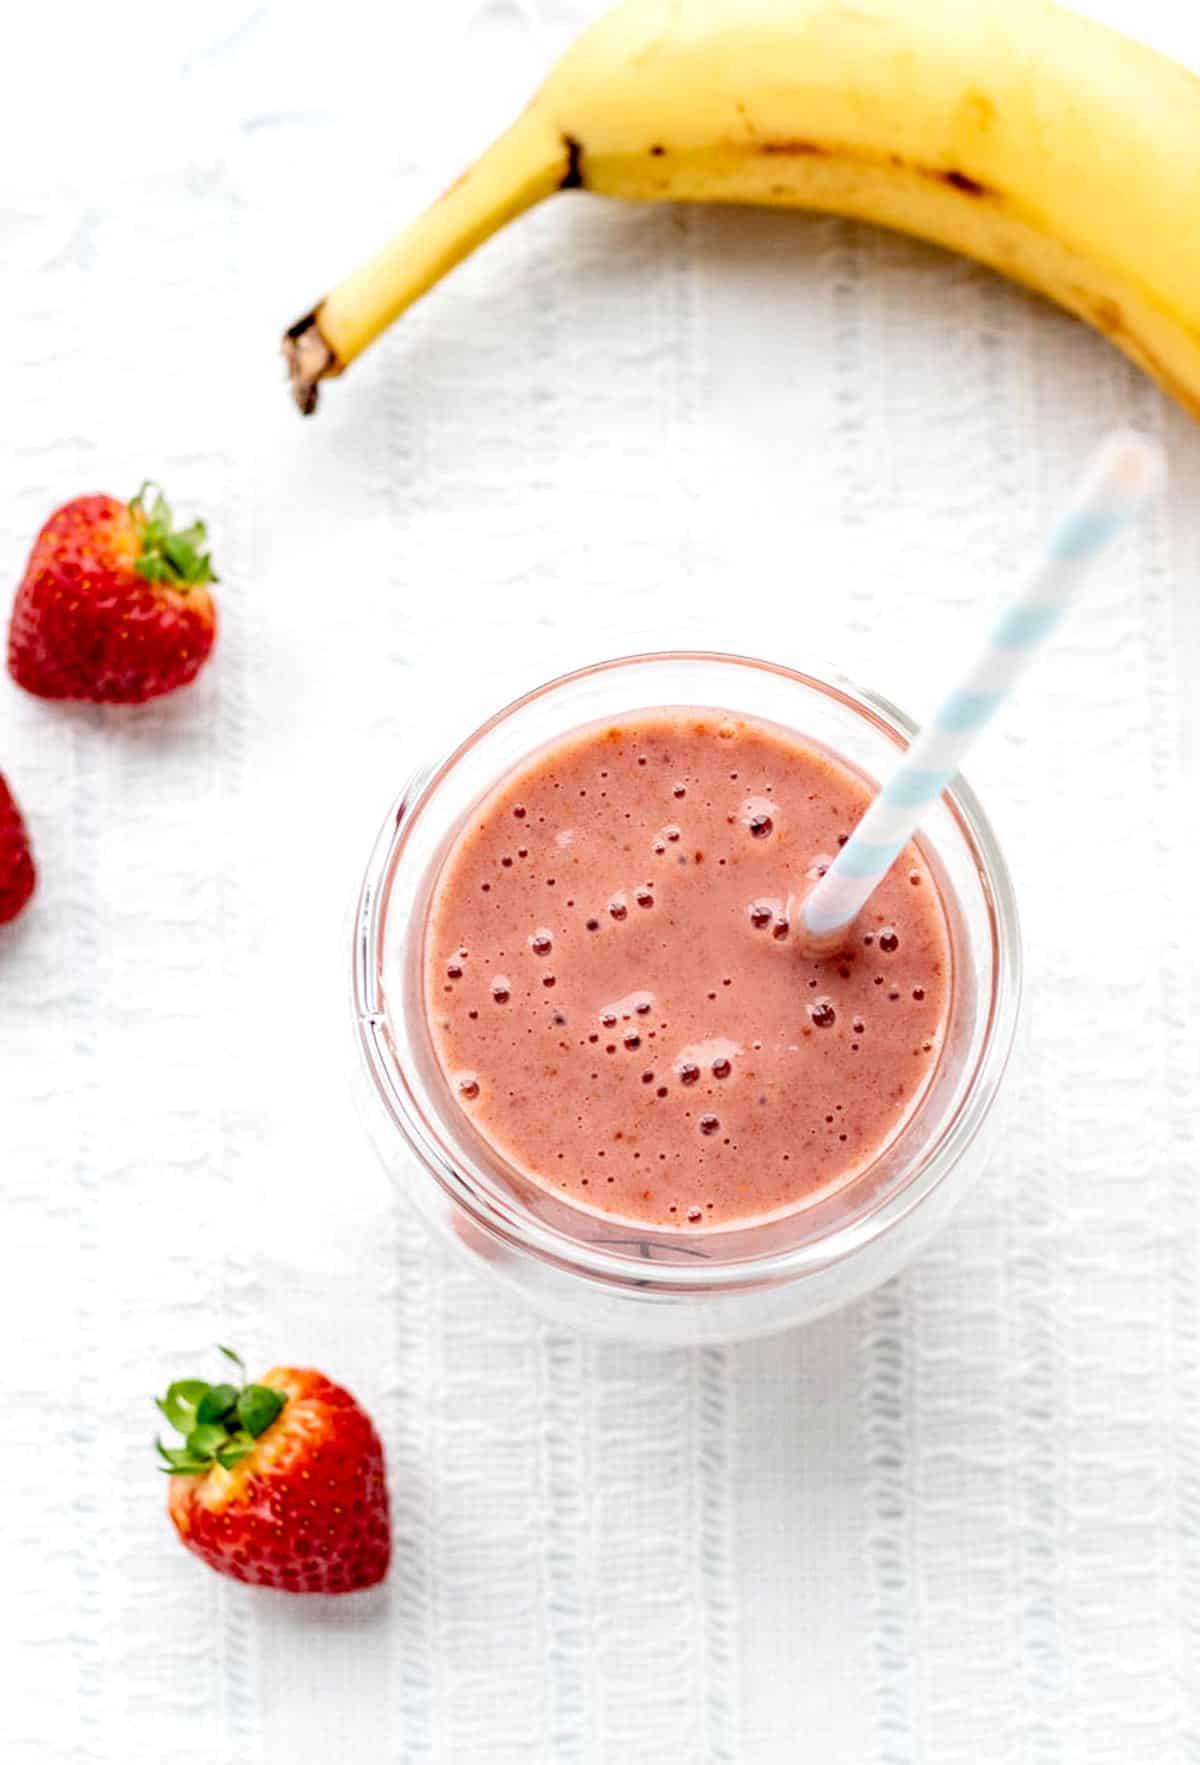 An overhead image of the strawberry and banana smoothie without yougrt in a glass.